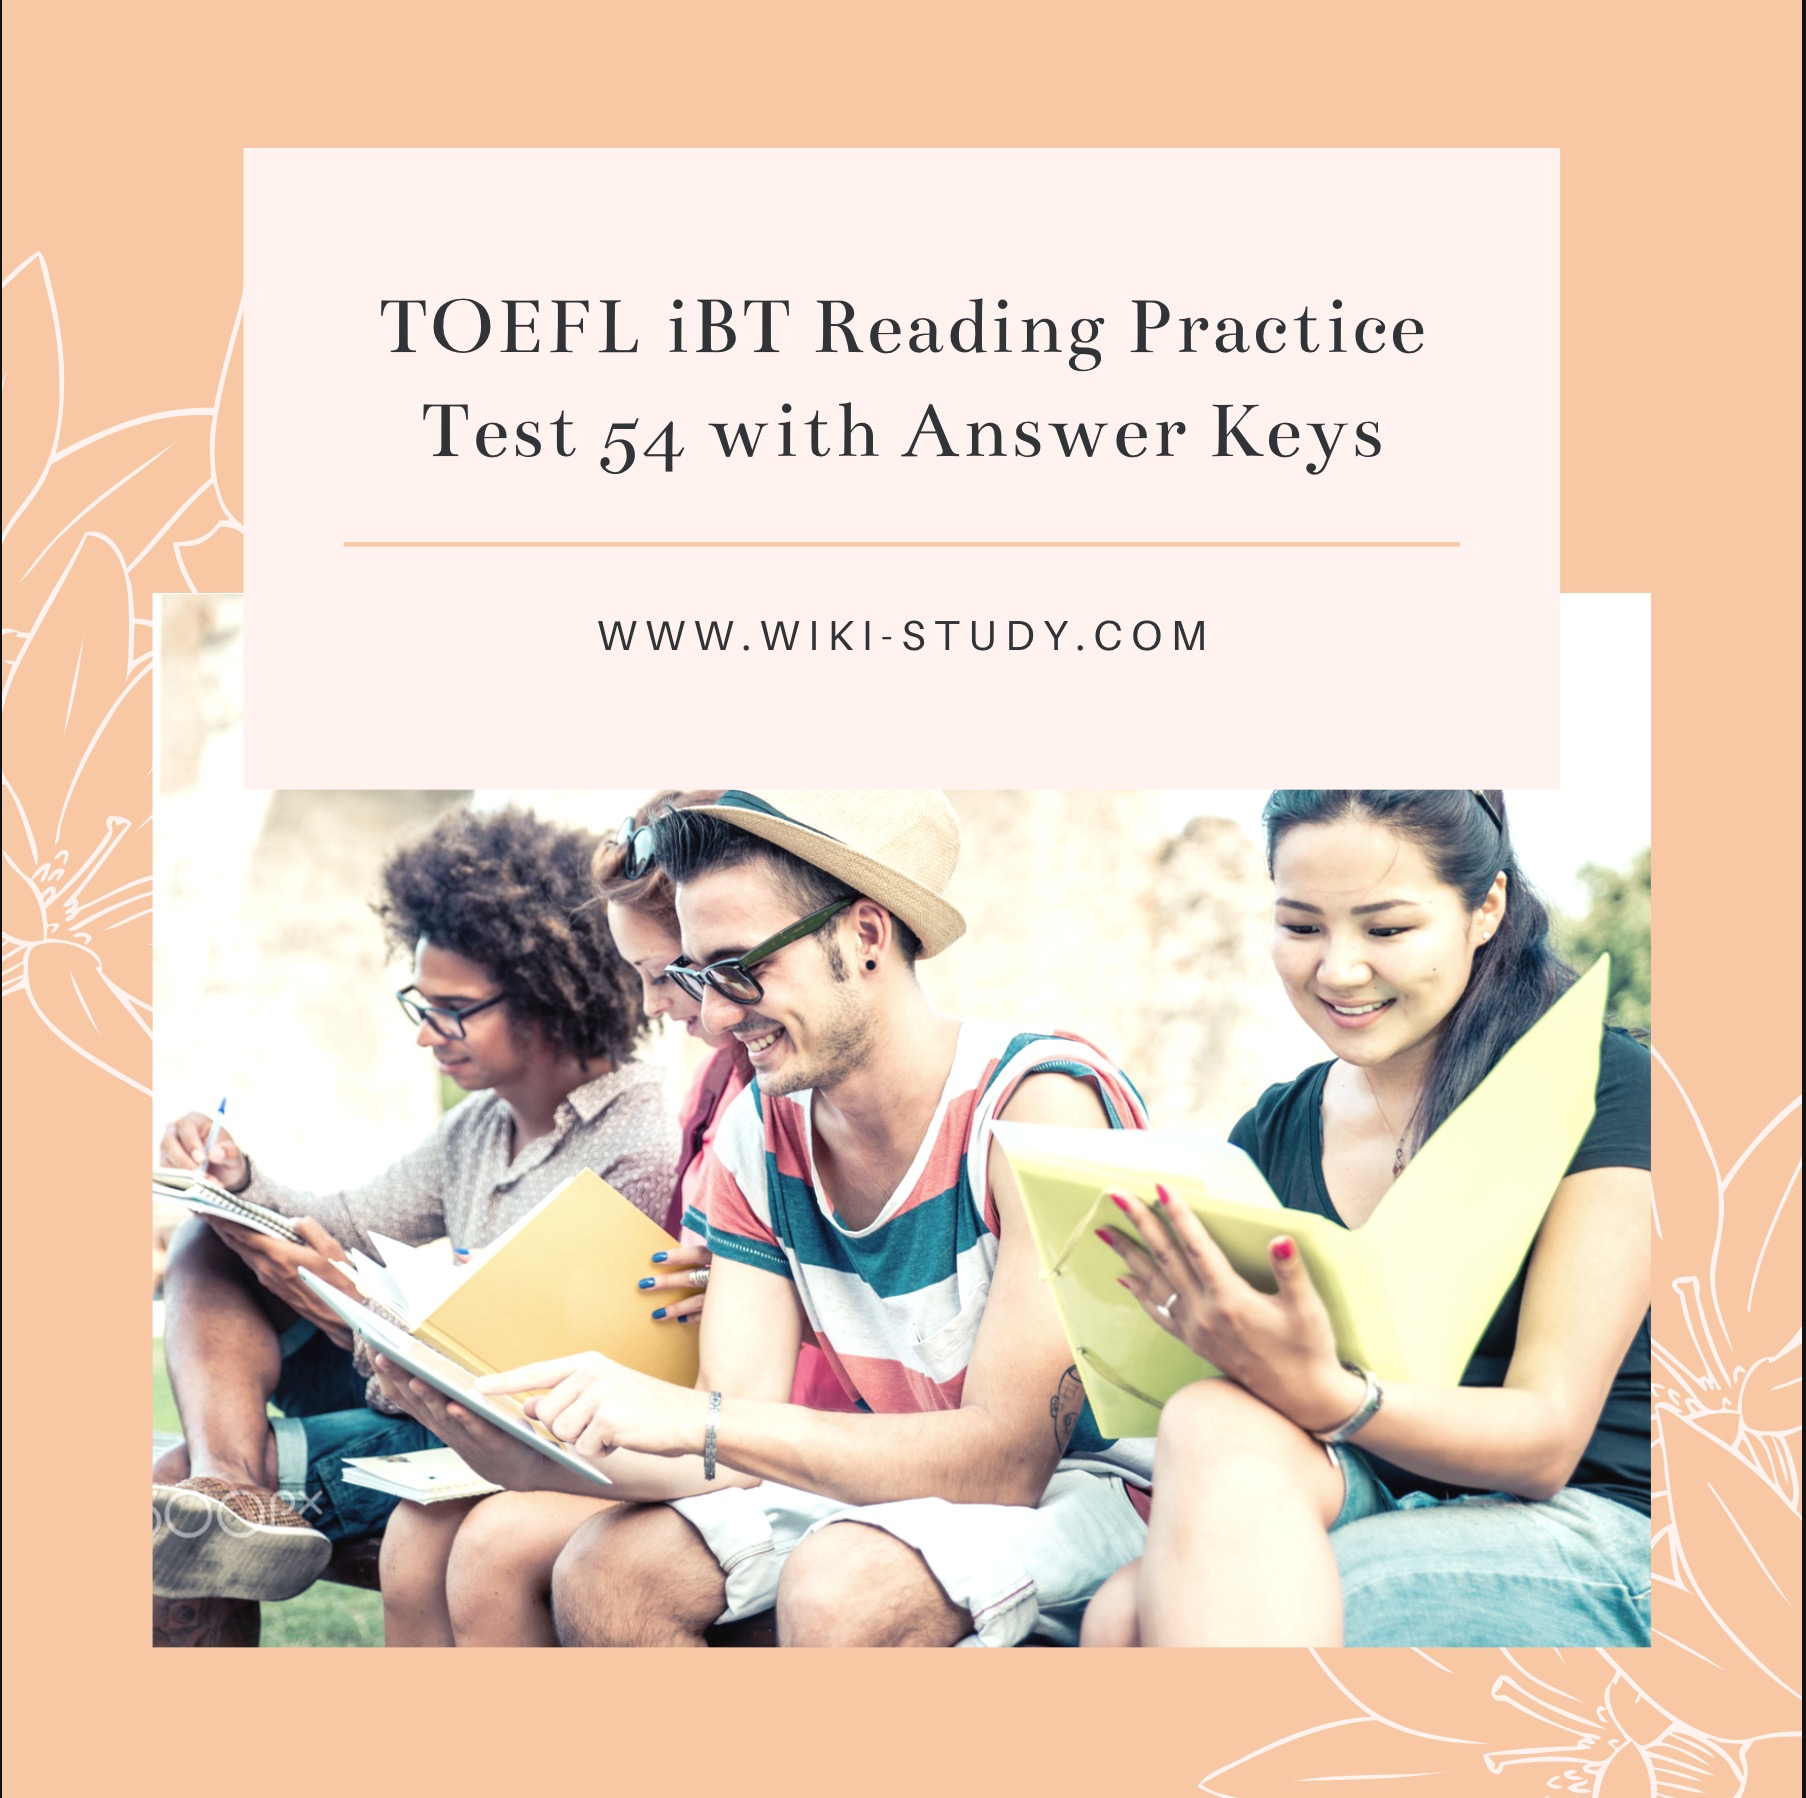 TOEFL iBT Reading Practice Test 54 with Answer Keys